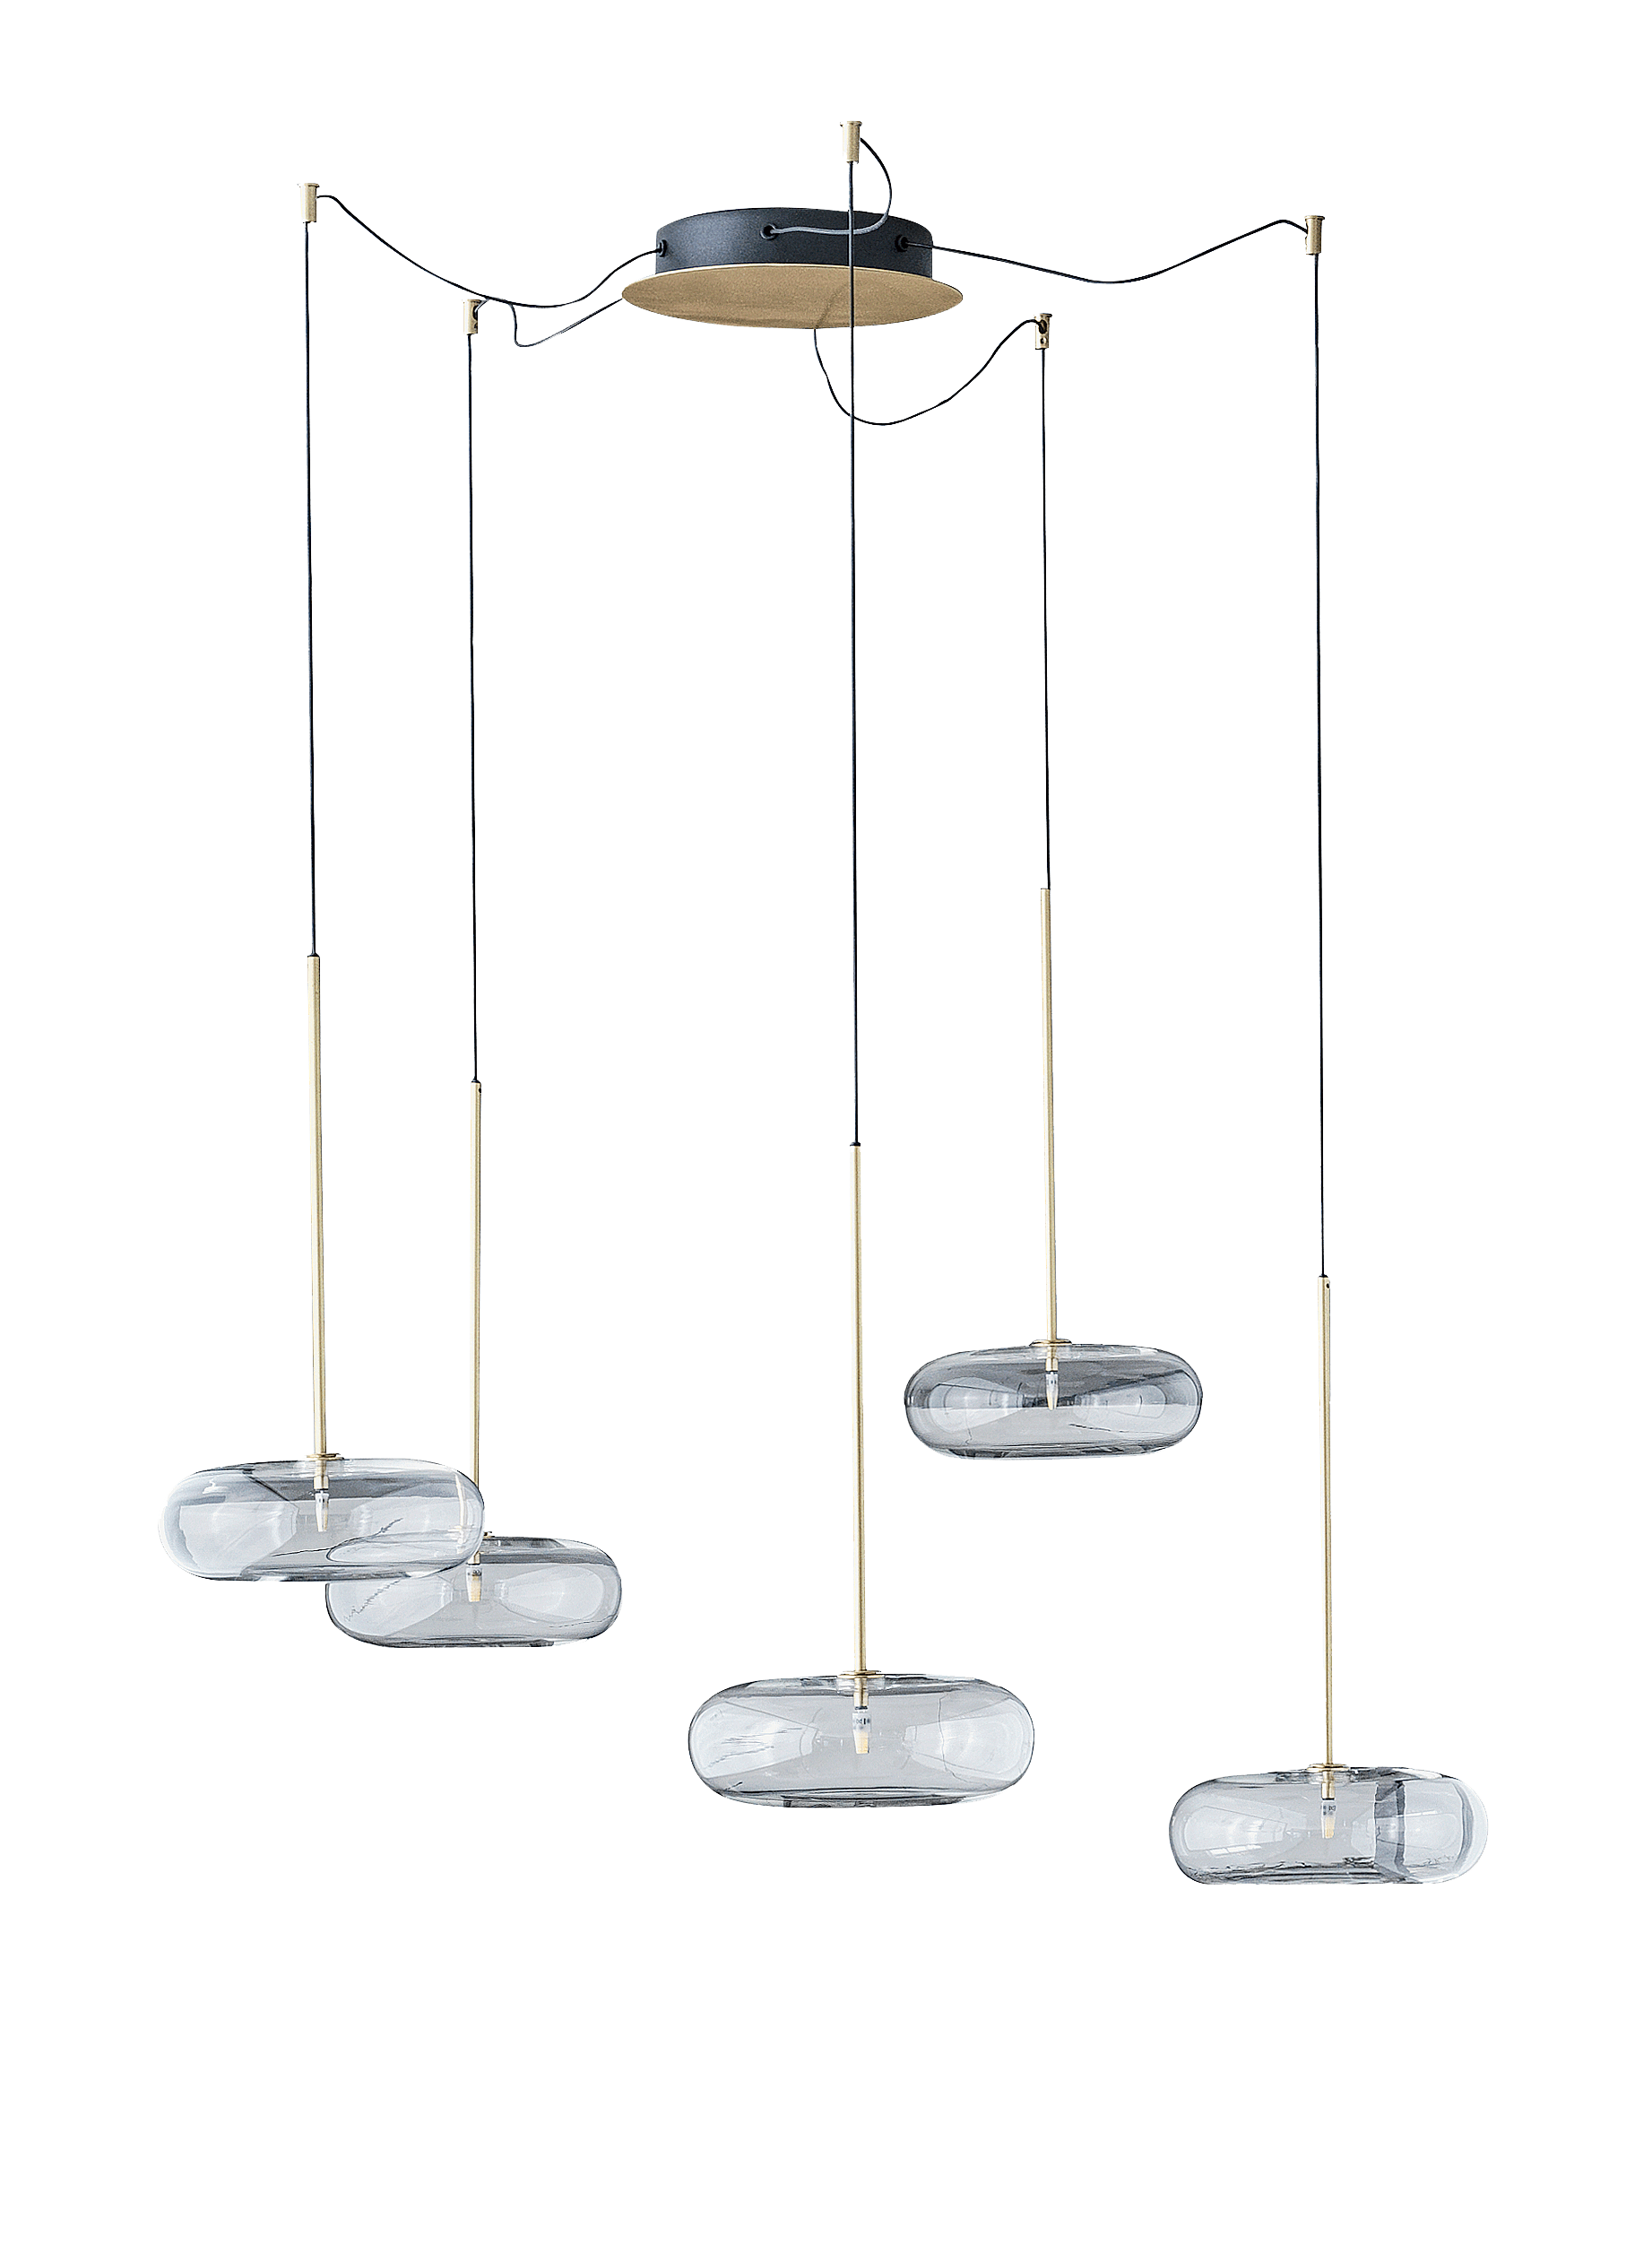 Spark Pendant lamp with M352 natural brass frame